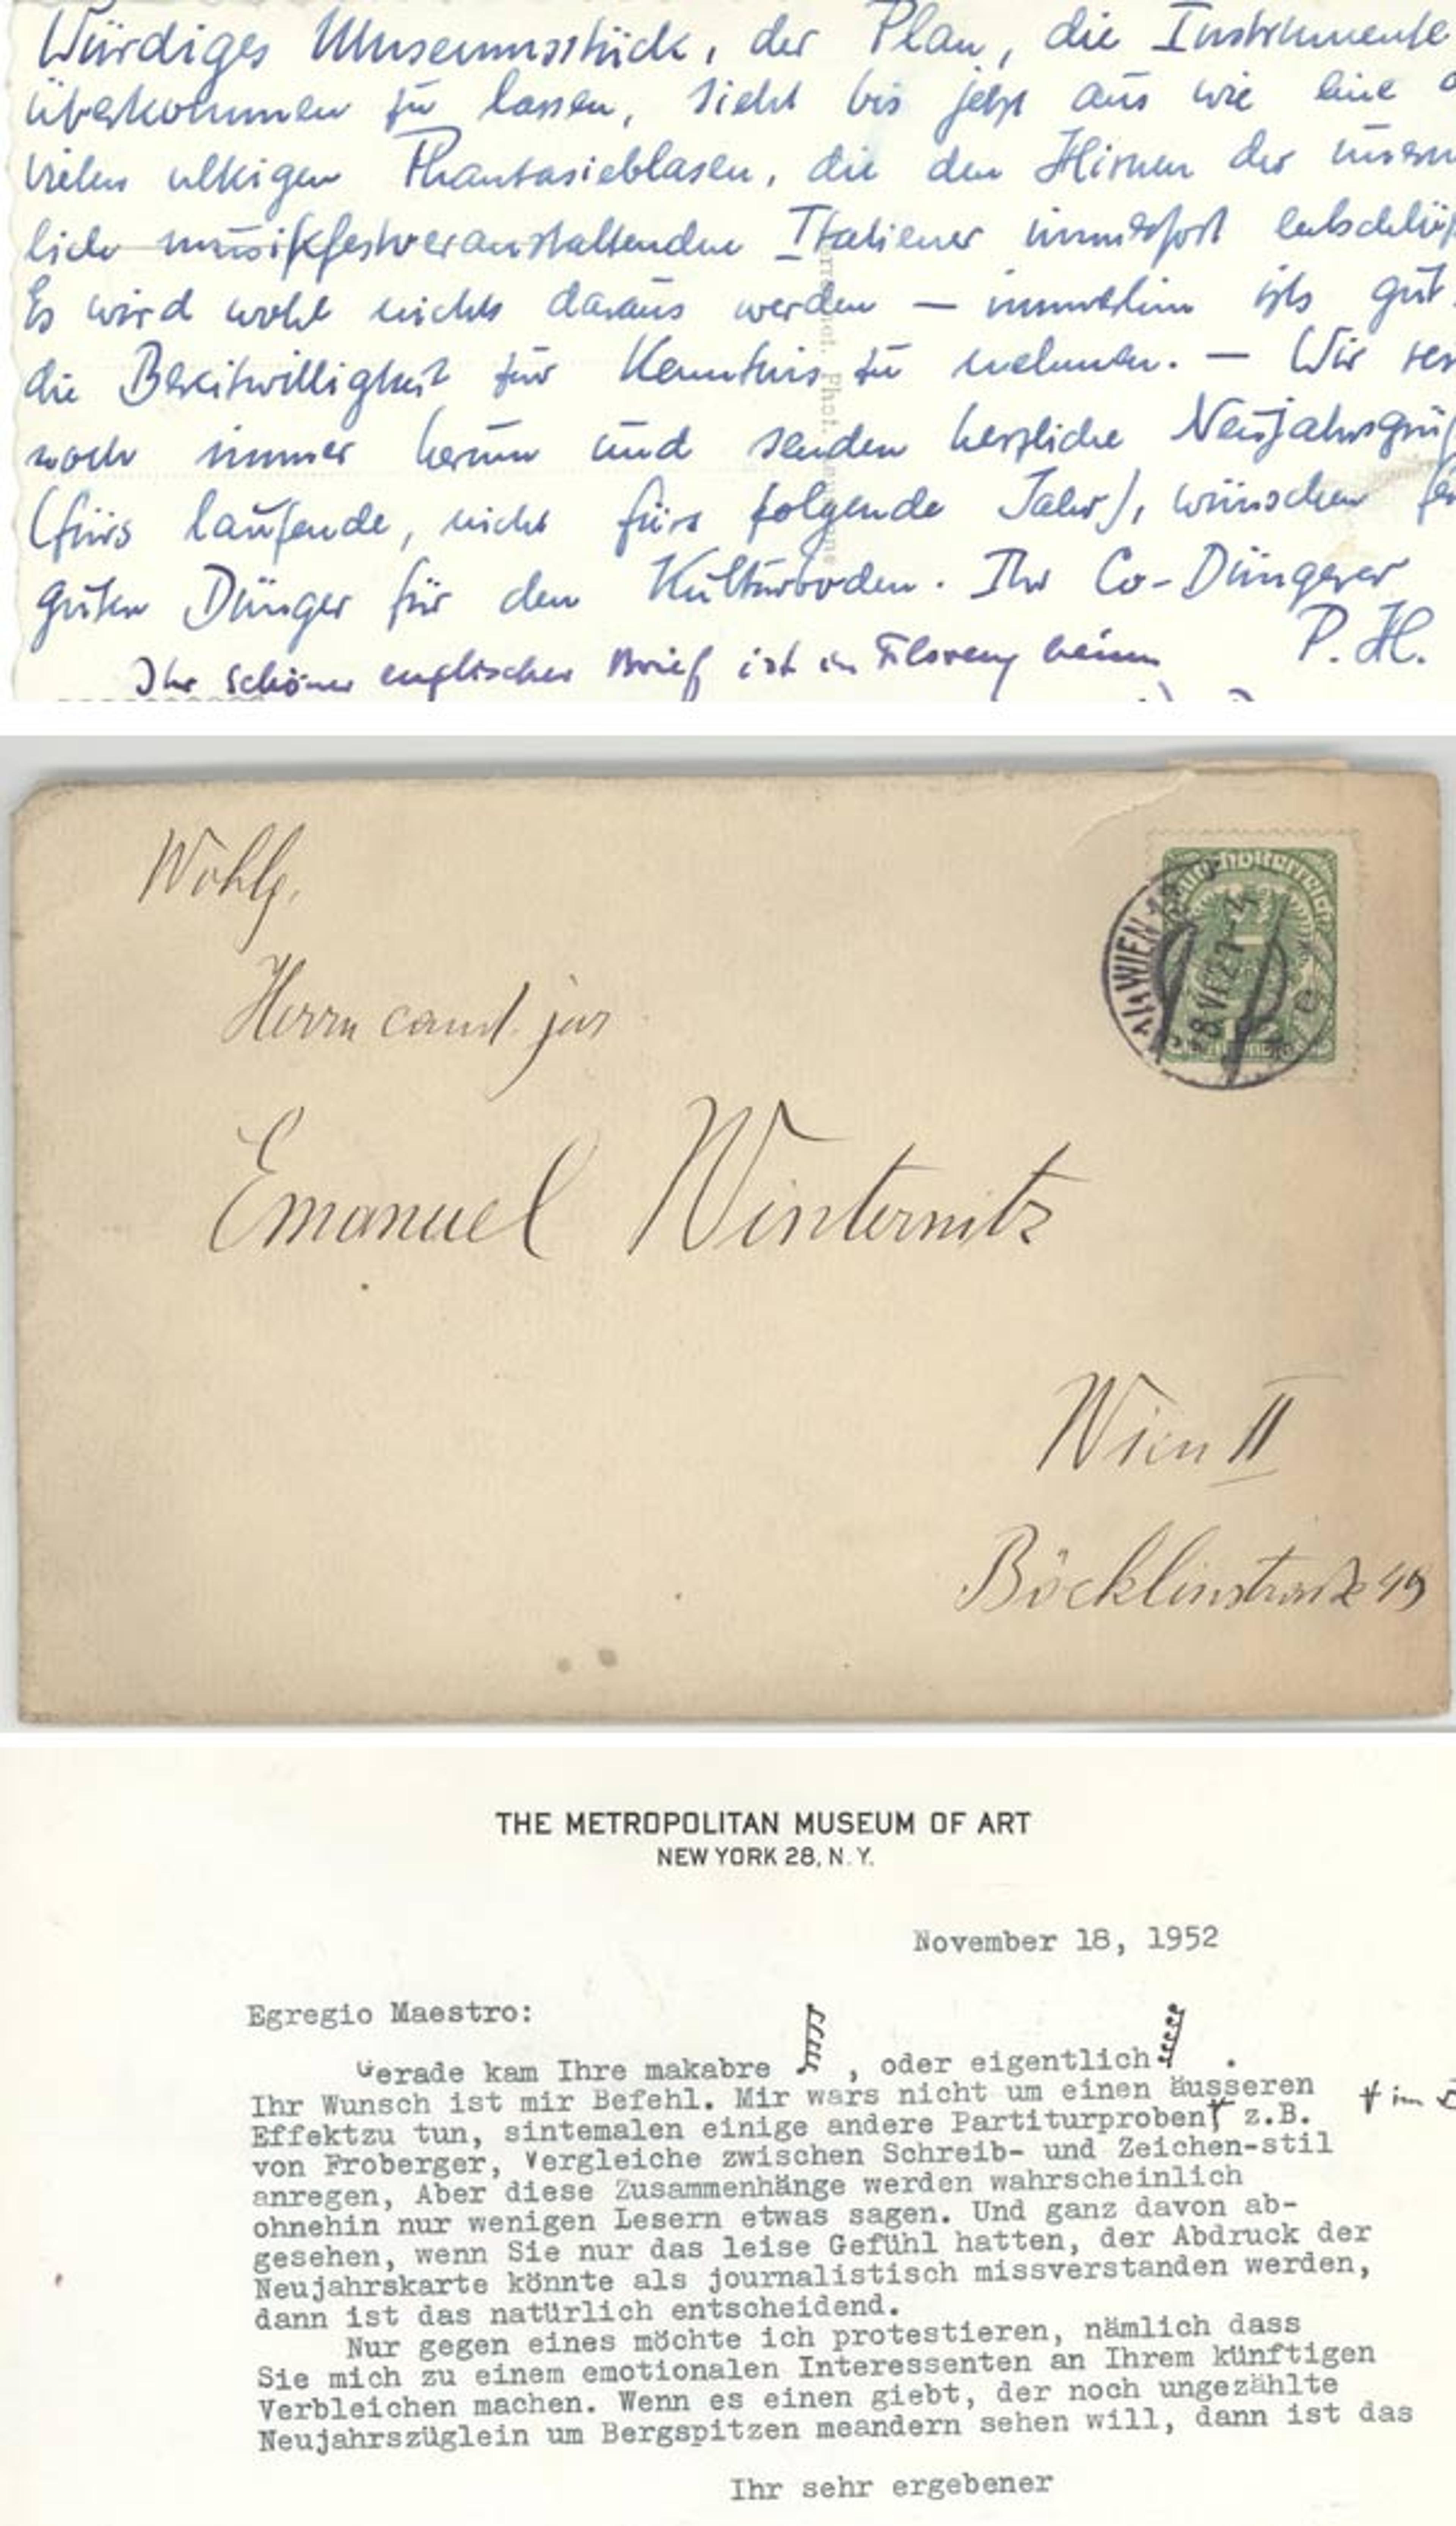 Correspondence between Winternitz and his lifelong friend, the conductor Paul Hindemith. Winternitz often wrote in German or Italian, and sometimes in French, as well as in English, and often mixed languages in one letter.